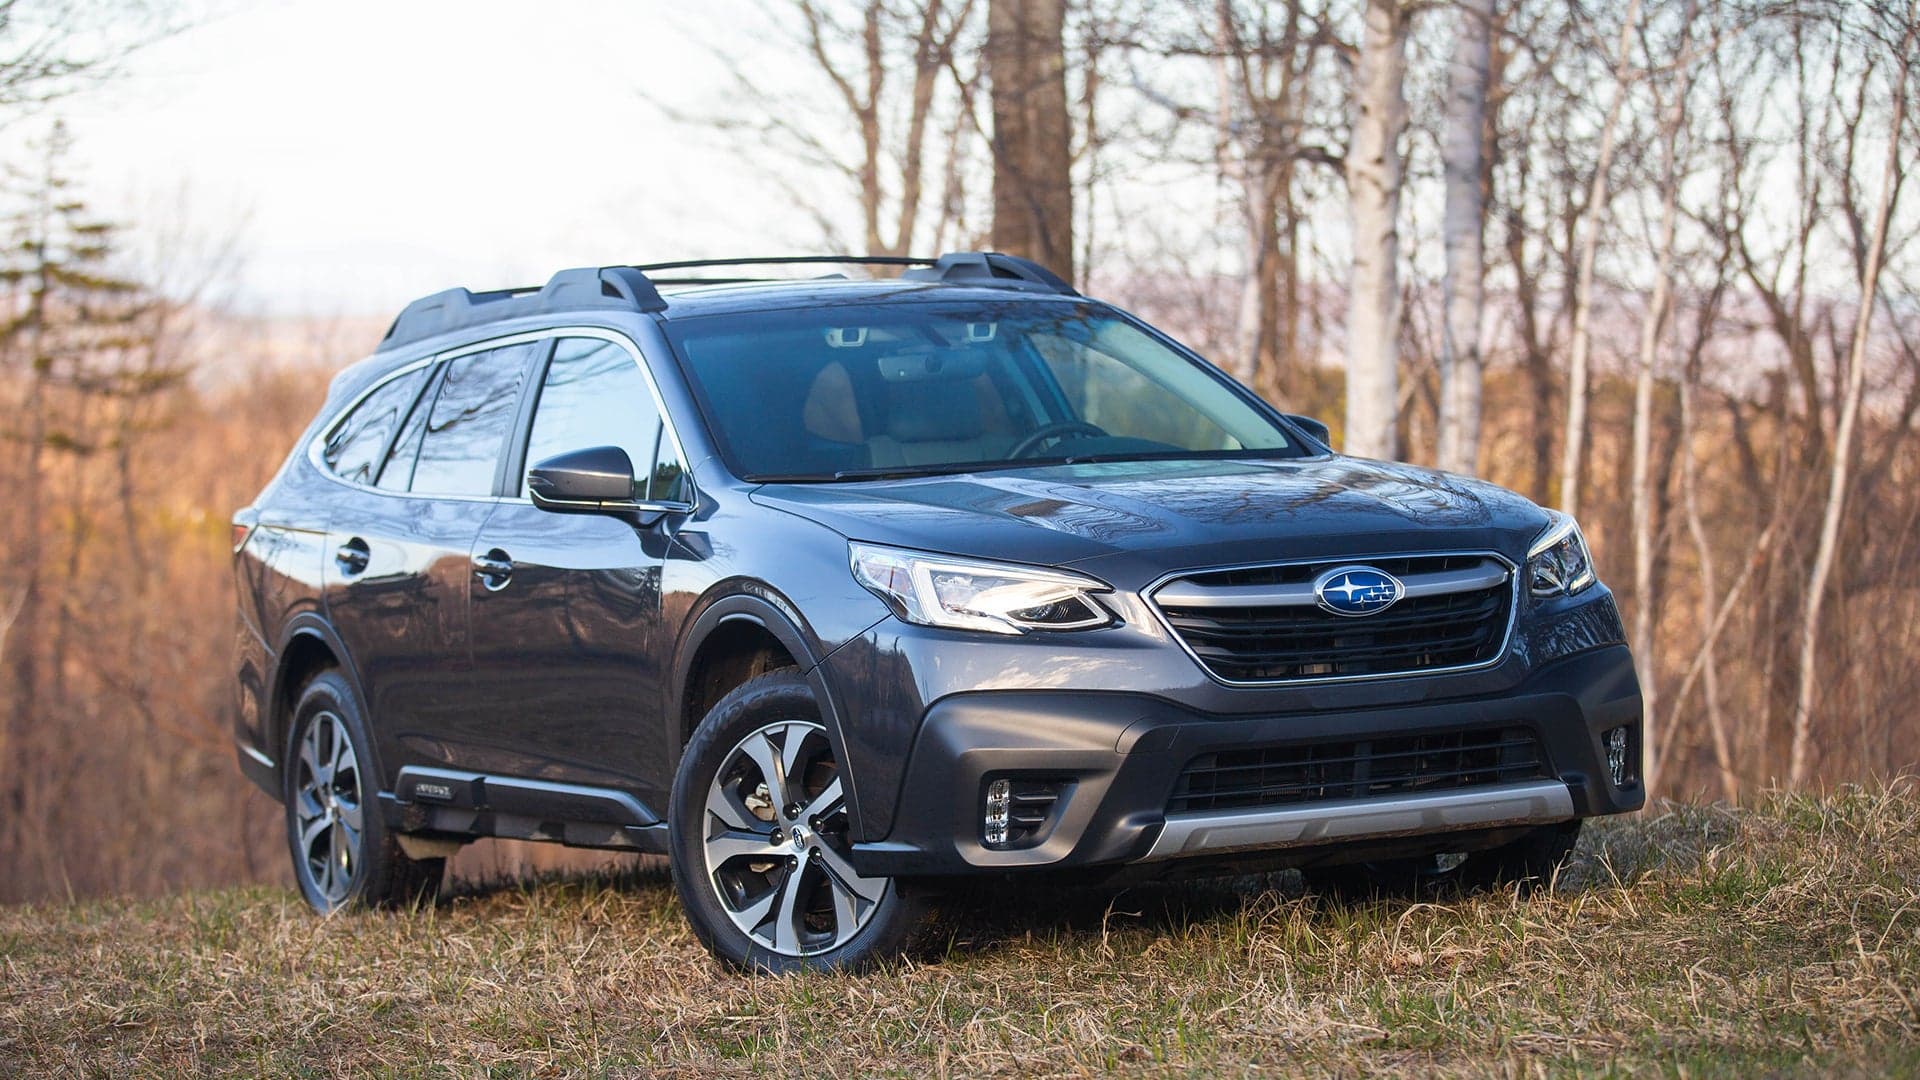 Your Questions About the 2020 Subaru Outback, Answered